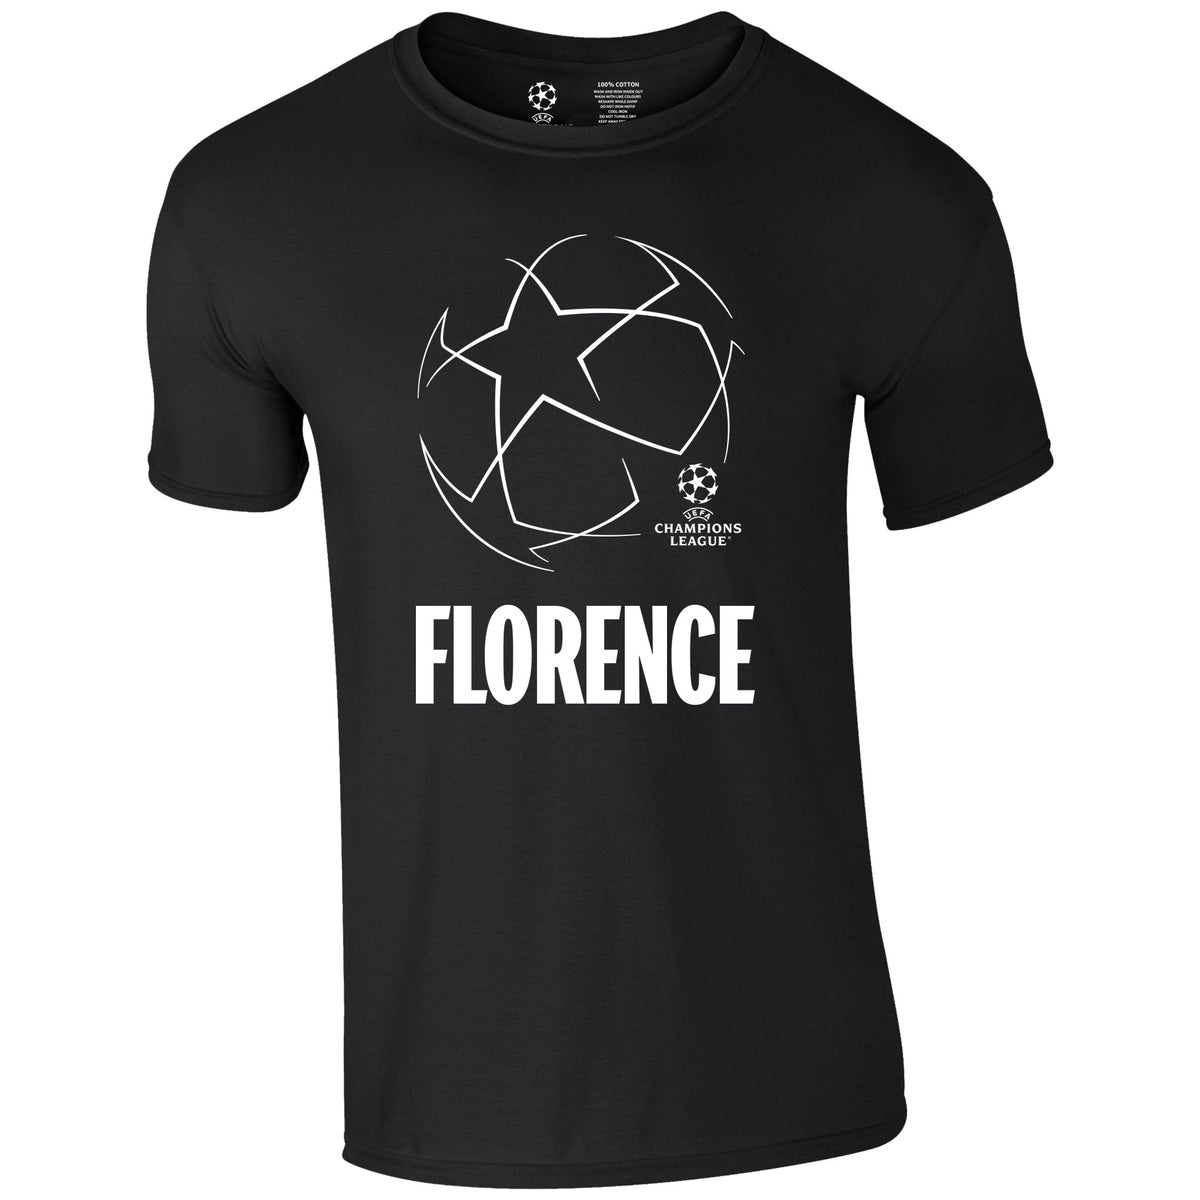 Champions League Starball Florence City T-Shirt Black